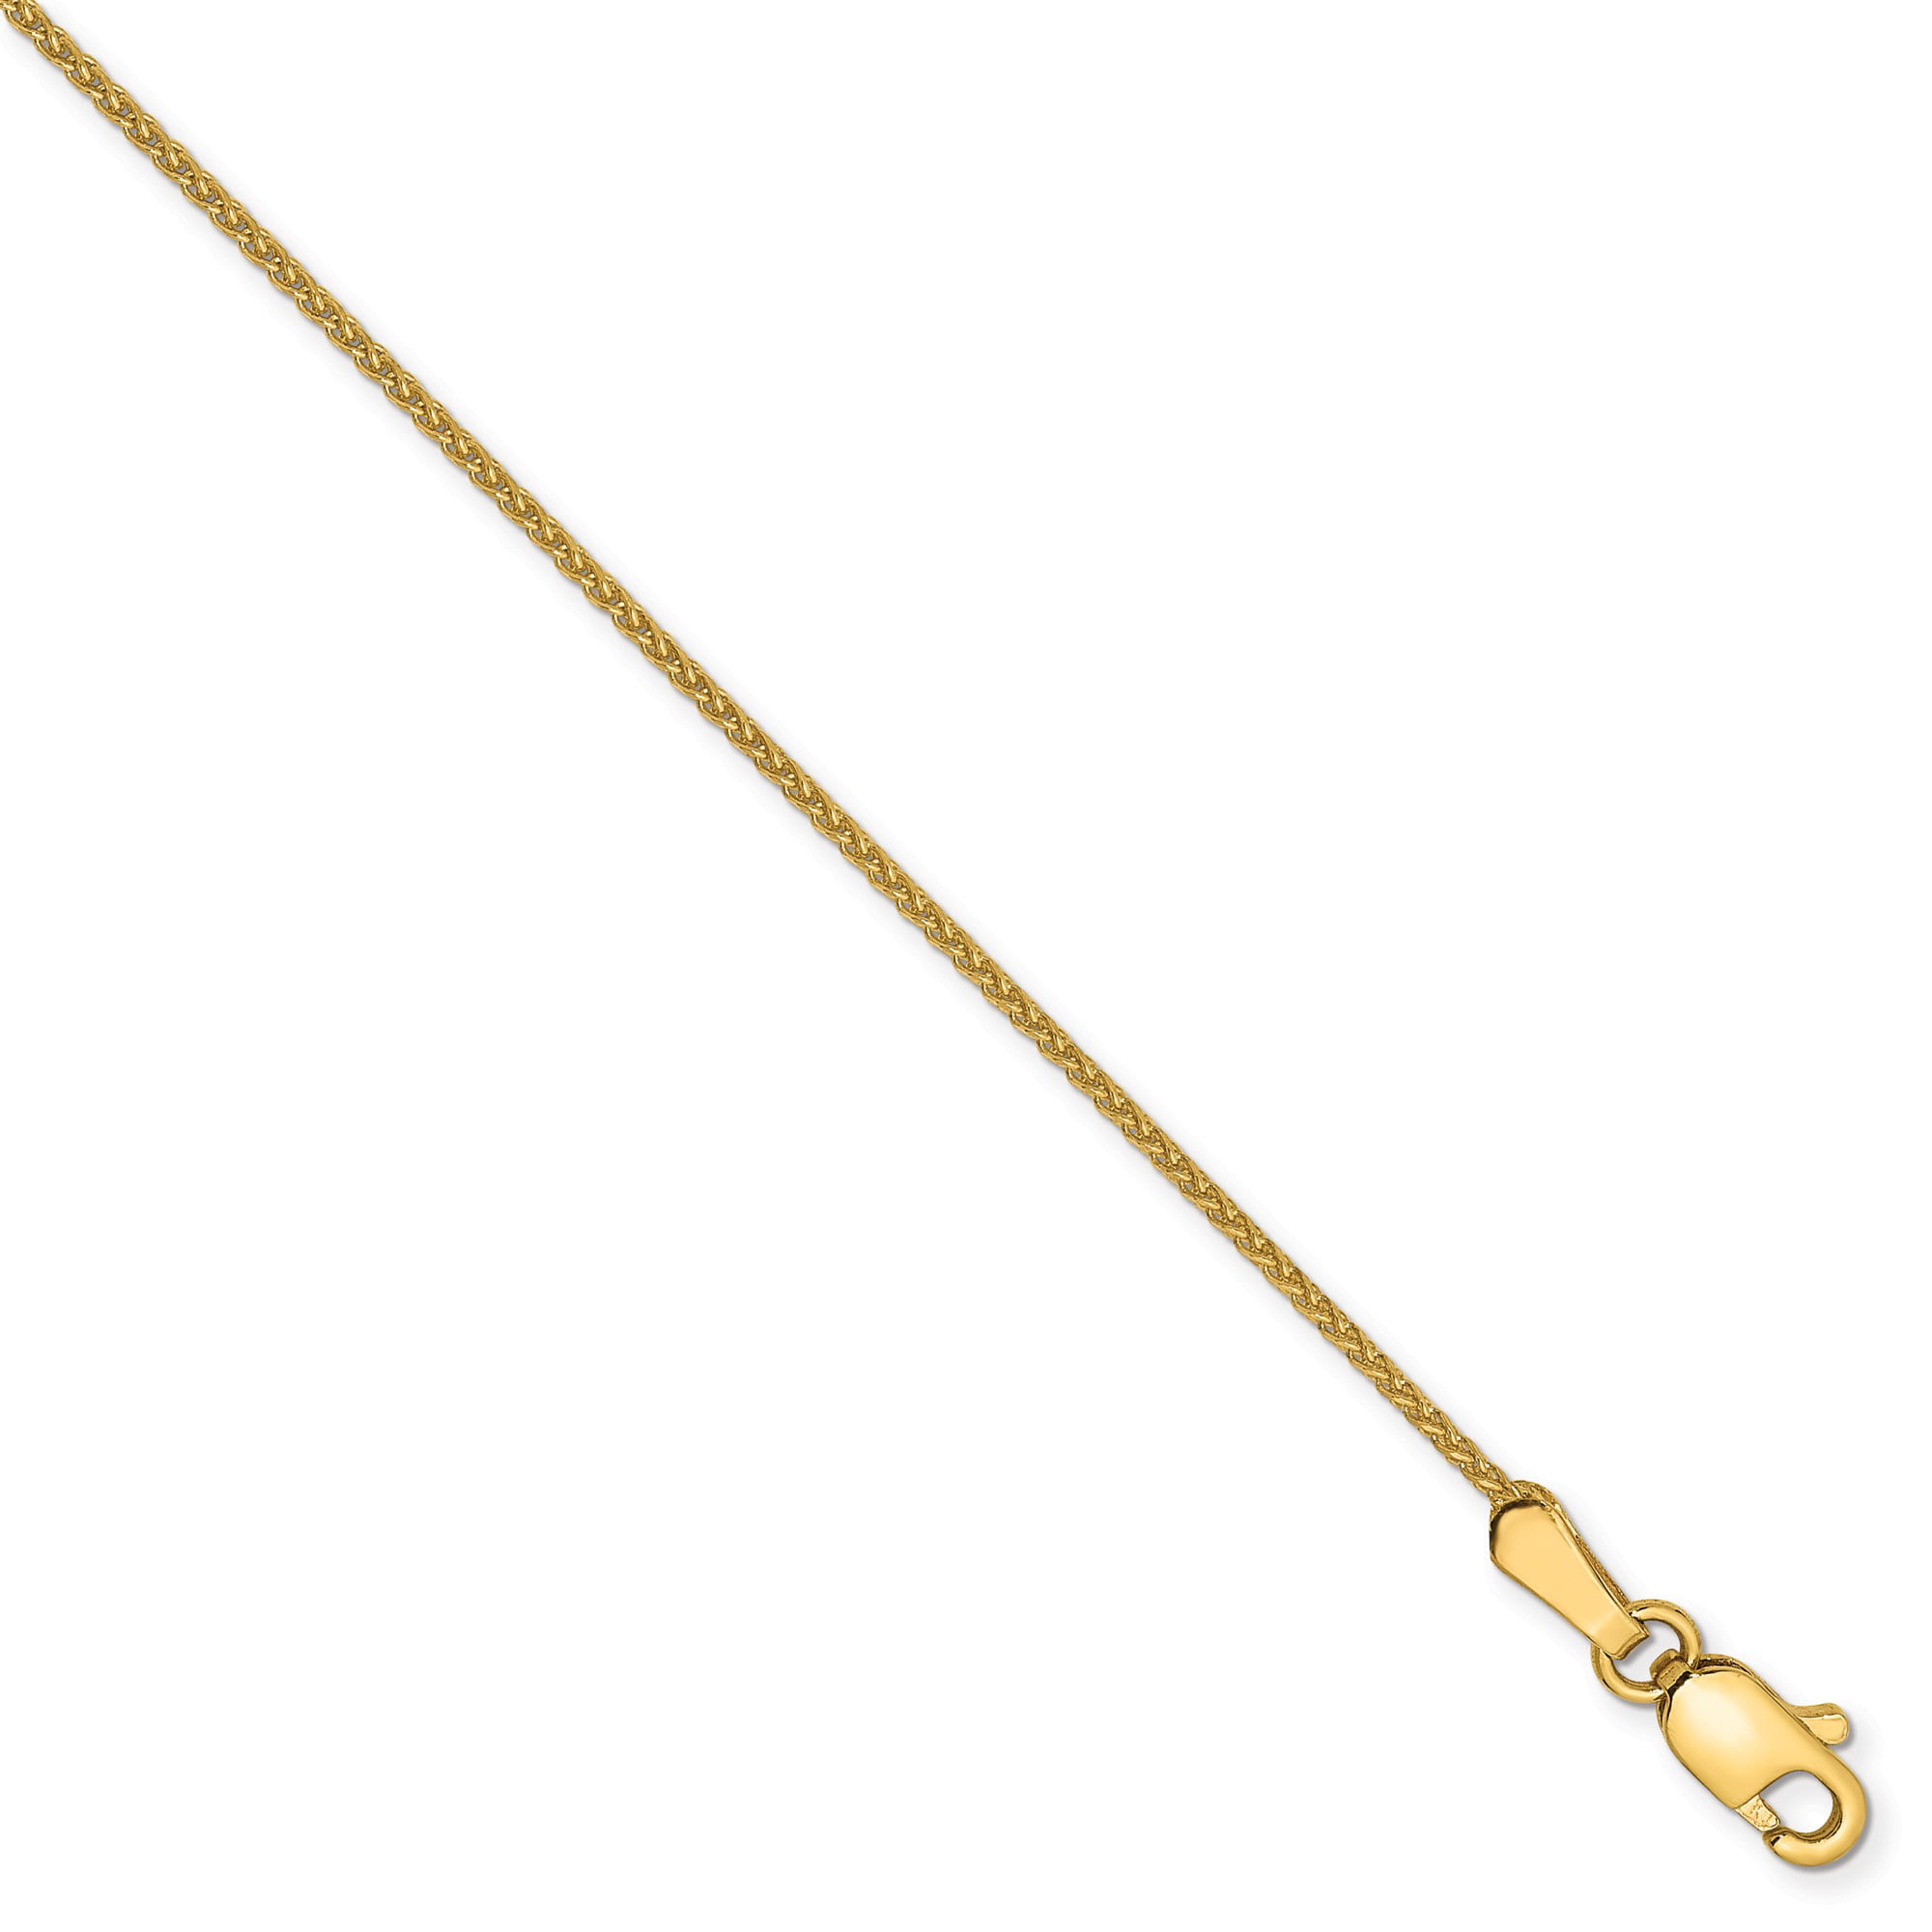 14k 1mm Solid D/c Spiga Chain Best Quality Free Gift Box